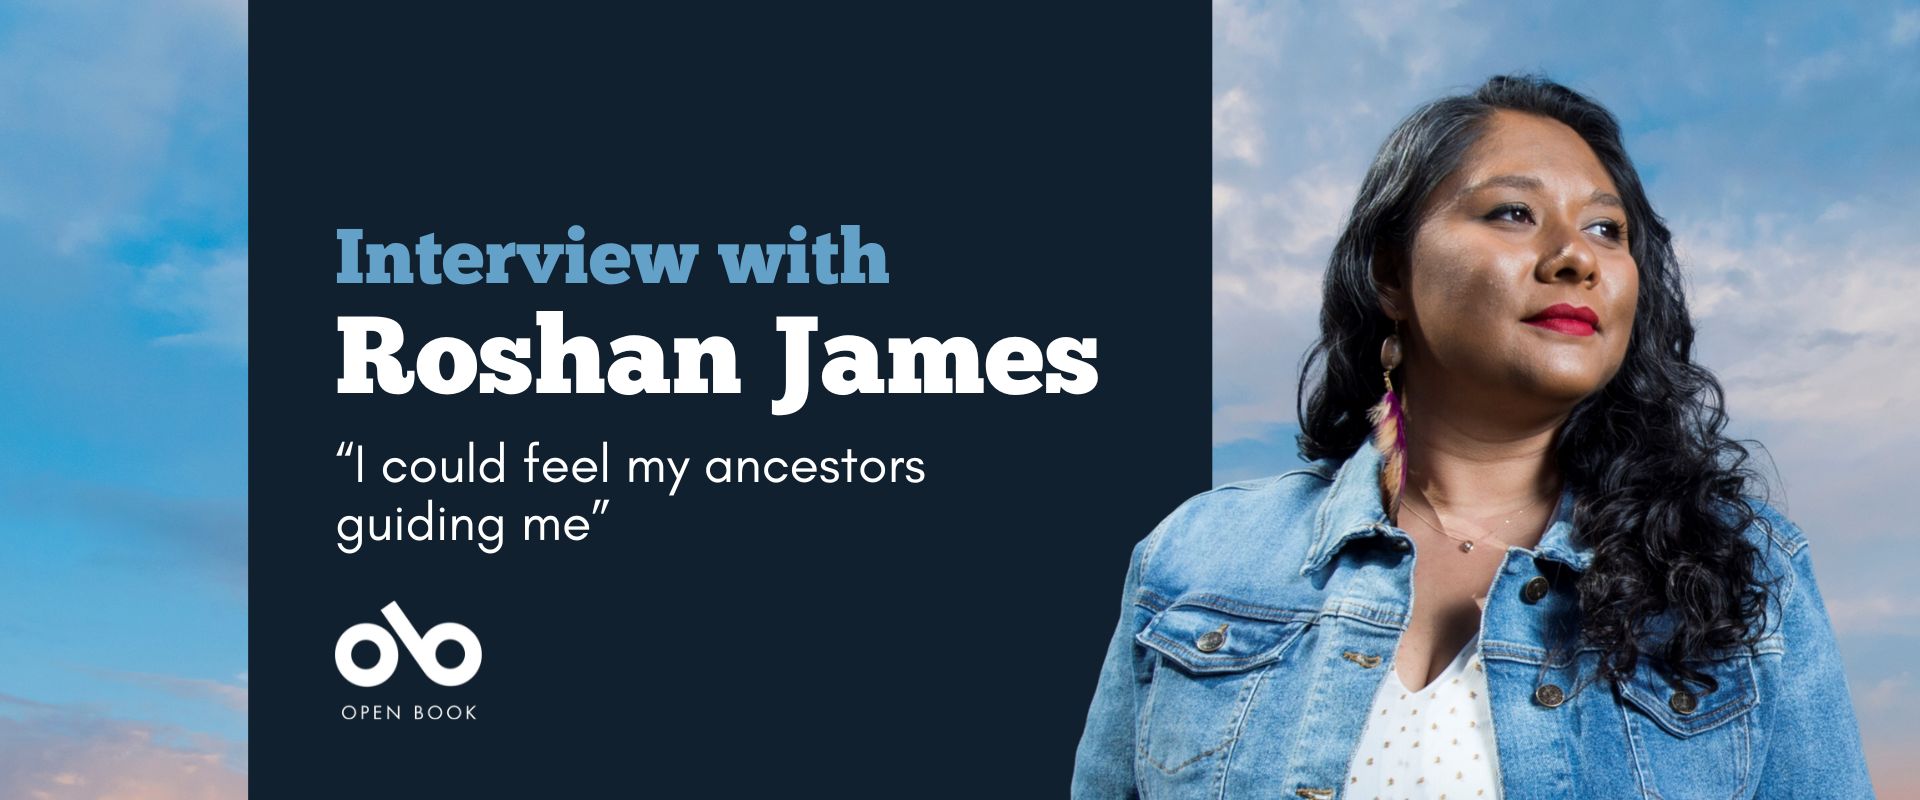 Banner image with a background of blue sky. Text reads "Interview with Roshan James. I could feel my ancestors guiding me" Photo of writer Roshan James on the right, Open Book logo bottom left